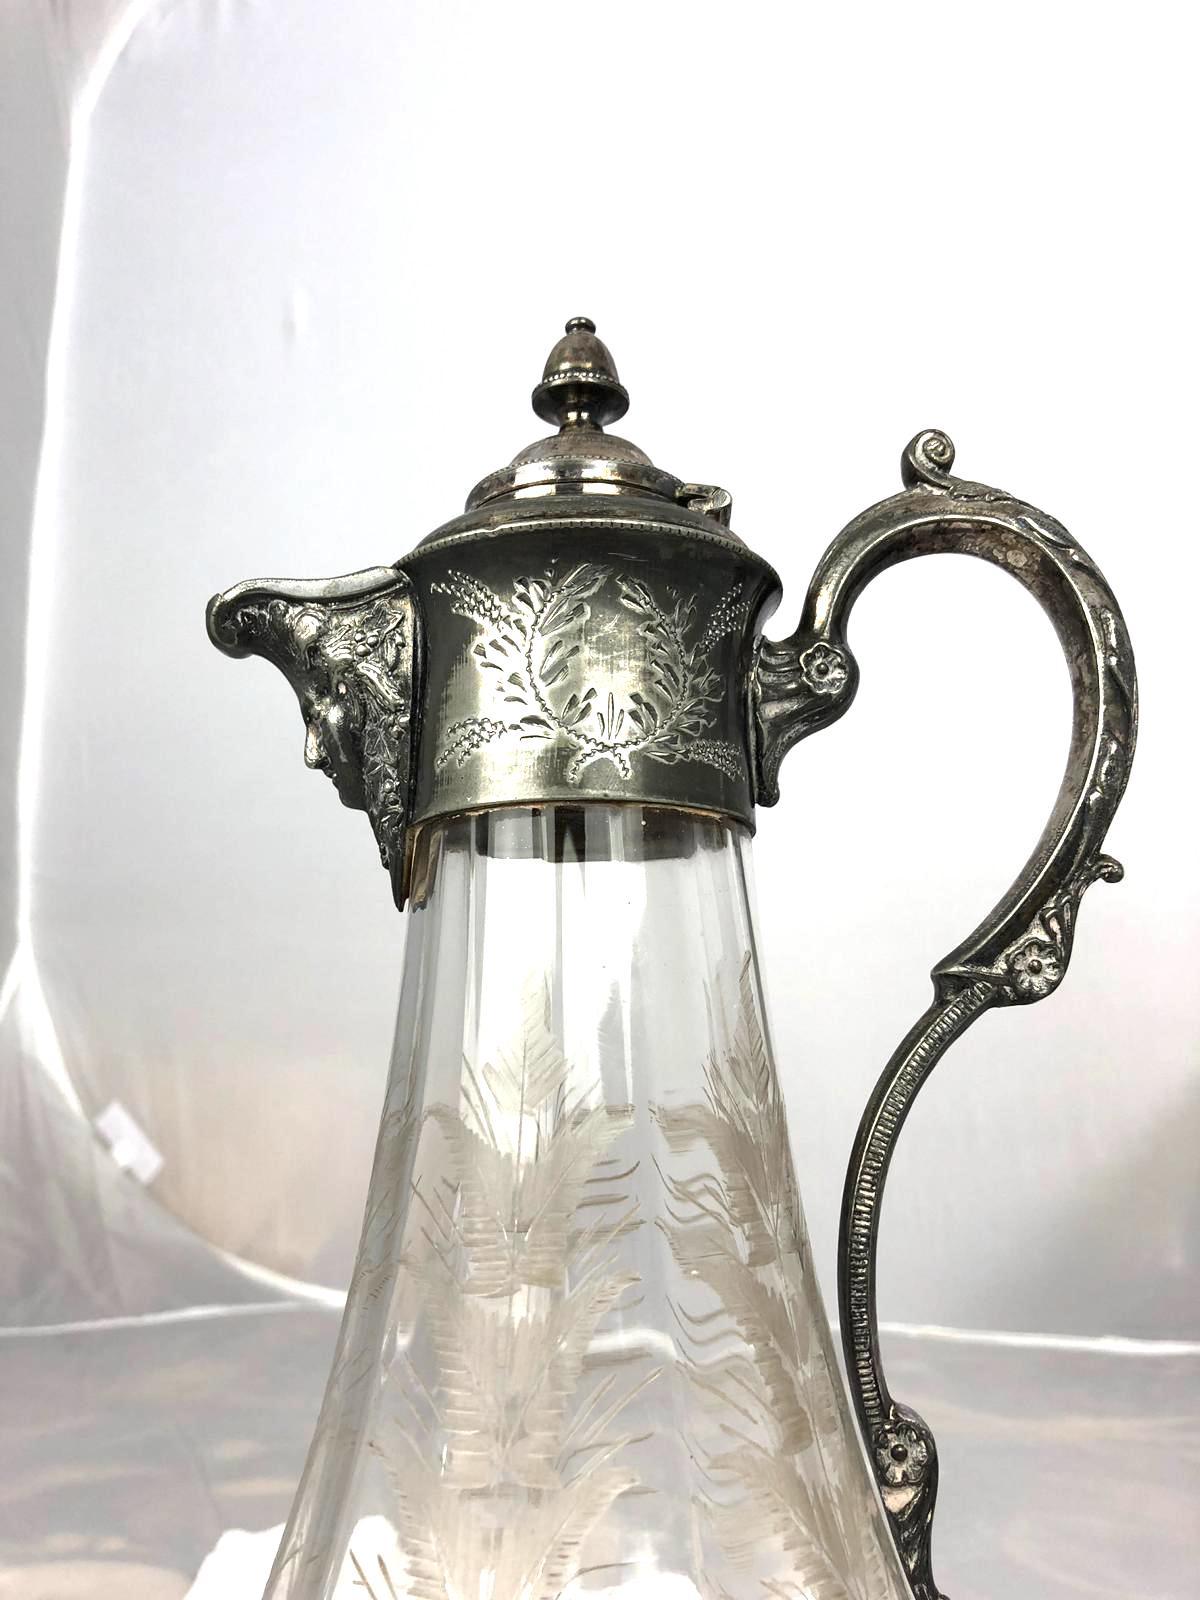 A stunning 19th century Art Nouveau claret jug which has the function for holding red wine and water. The jug has silver plated mountings: Spout, lid and handle which are stunningly ornamented with chiselled decorations consisting of scrolls,